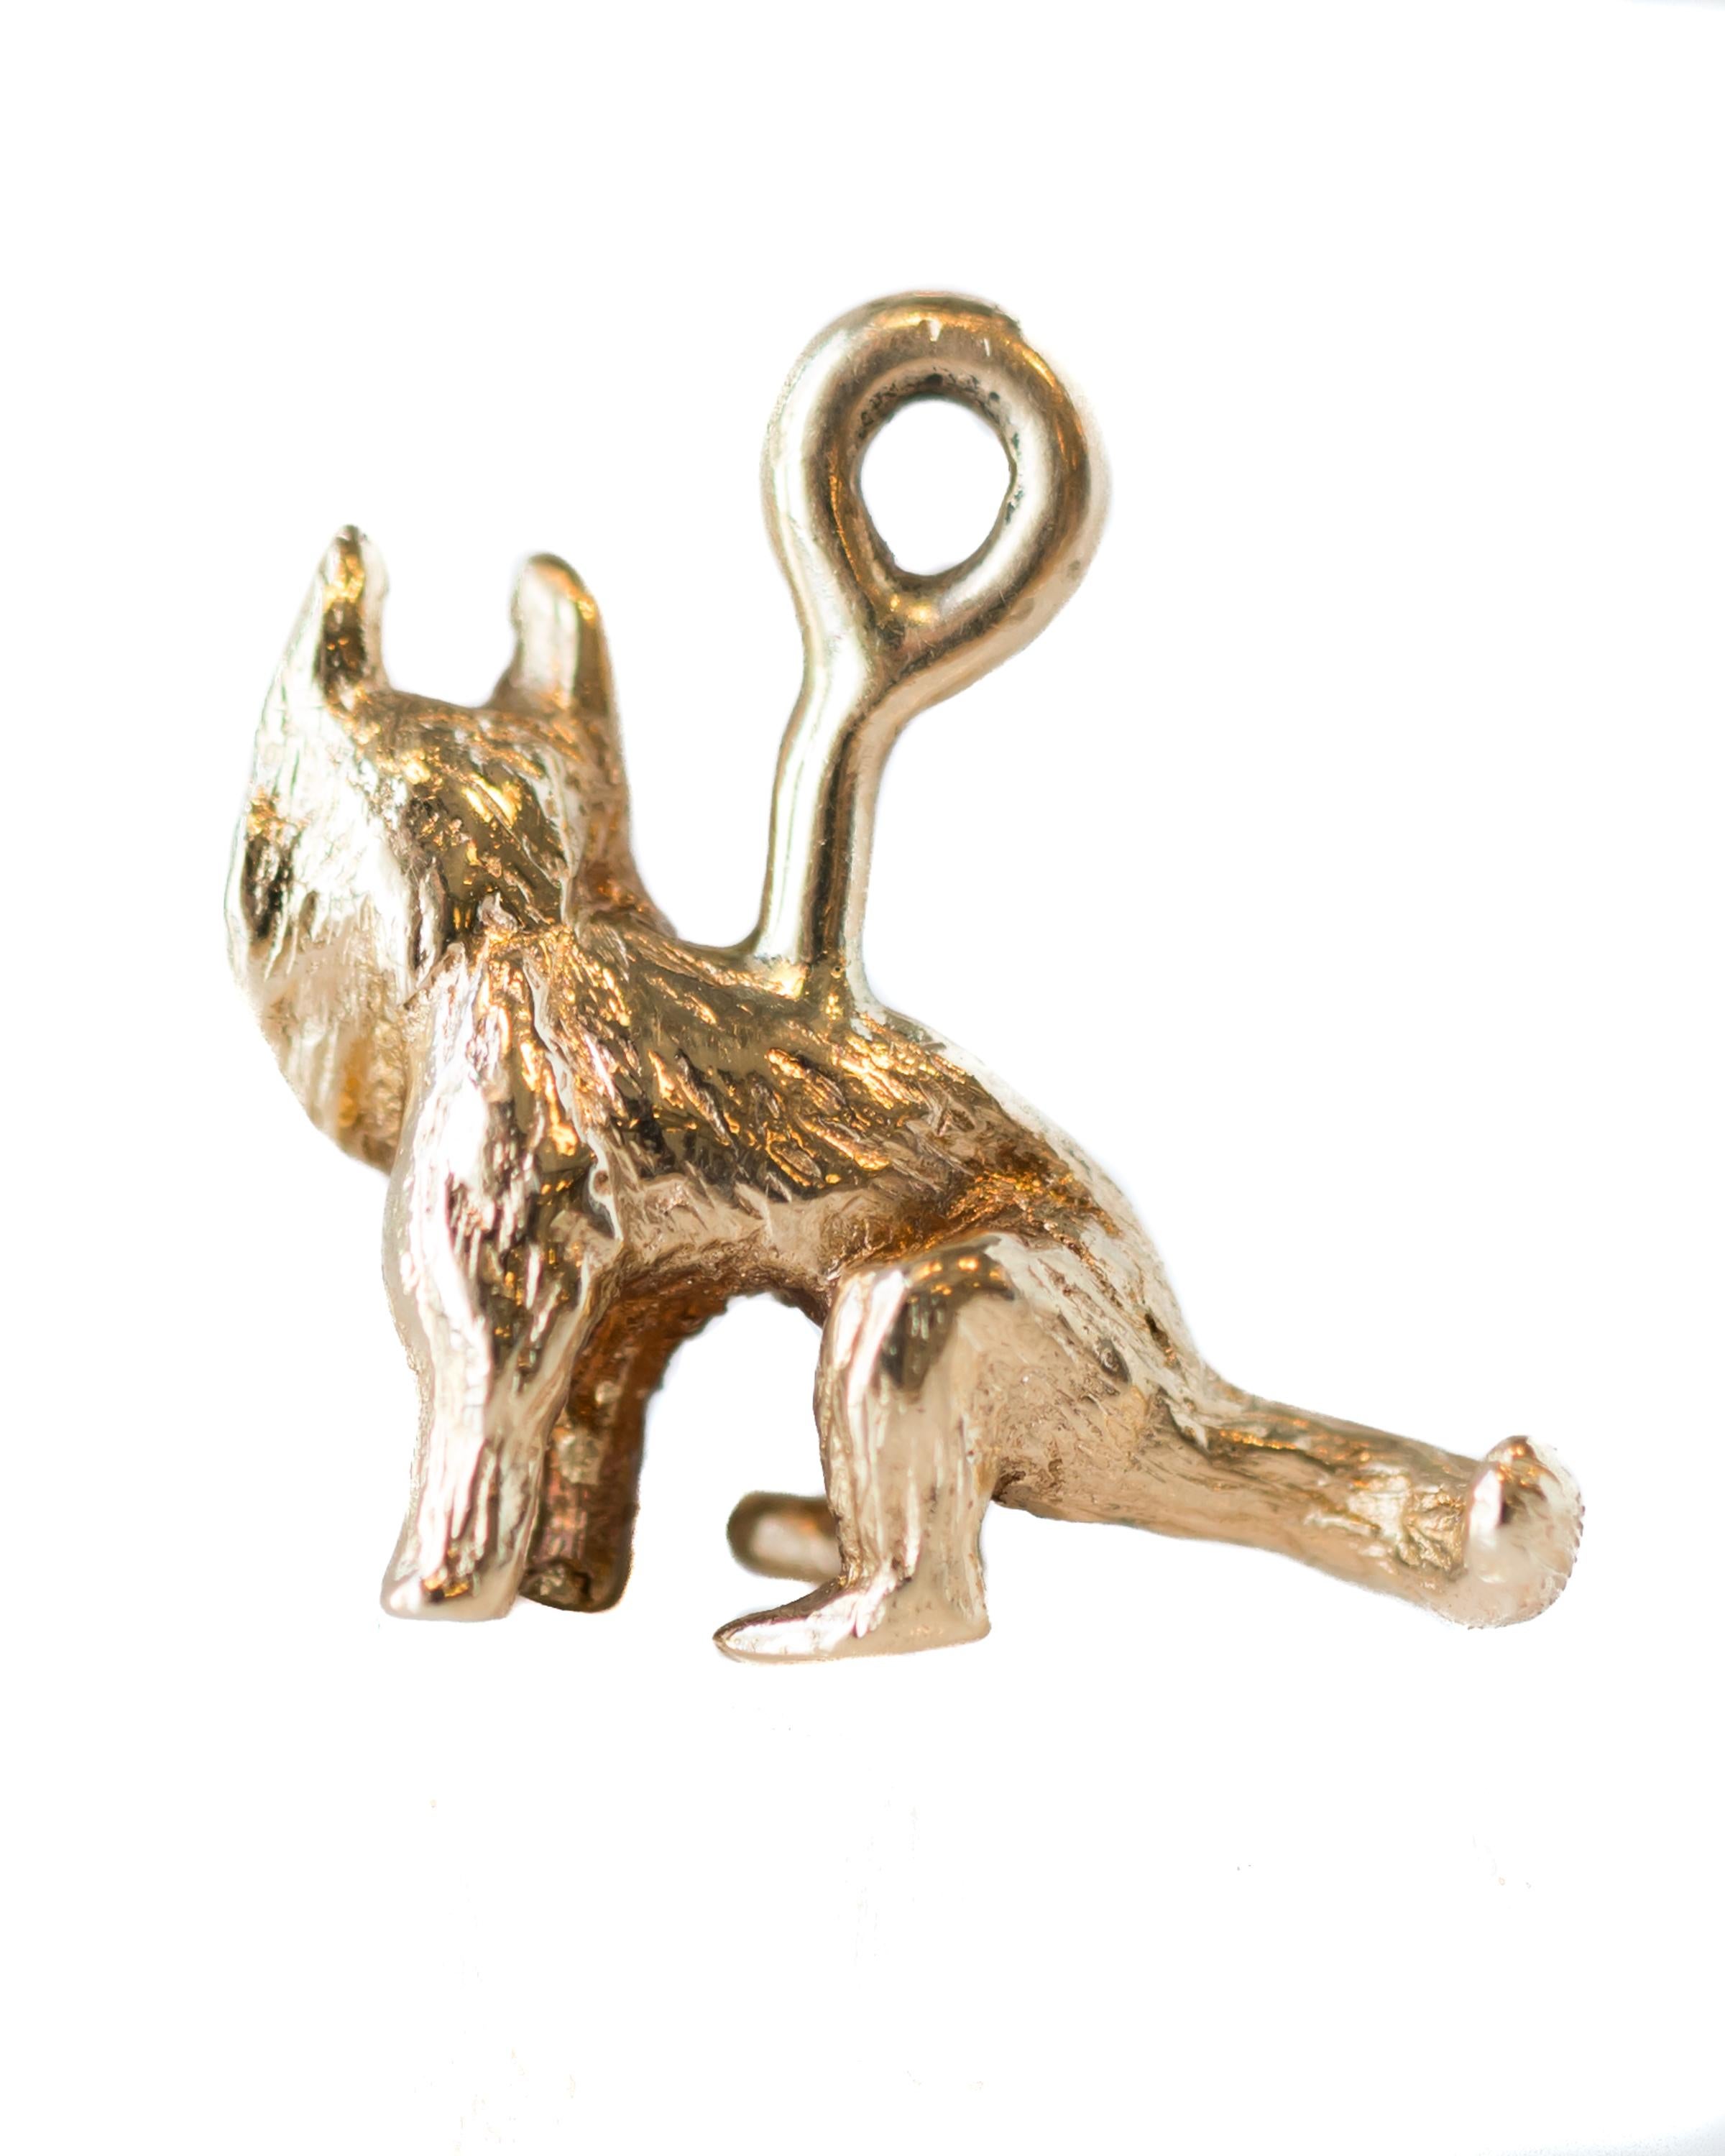 1950s Retro German Shepherd Dog Charm - 14 Karat Yellow Gold

Features:
Tiny Seated German Shepherd Dog with full ruff and tail and big ears
Very Detailed Design
Textured 14 karat Yellow Gold
Sturdy Bail 
Measures 15 x 15 millimeters 

Charm